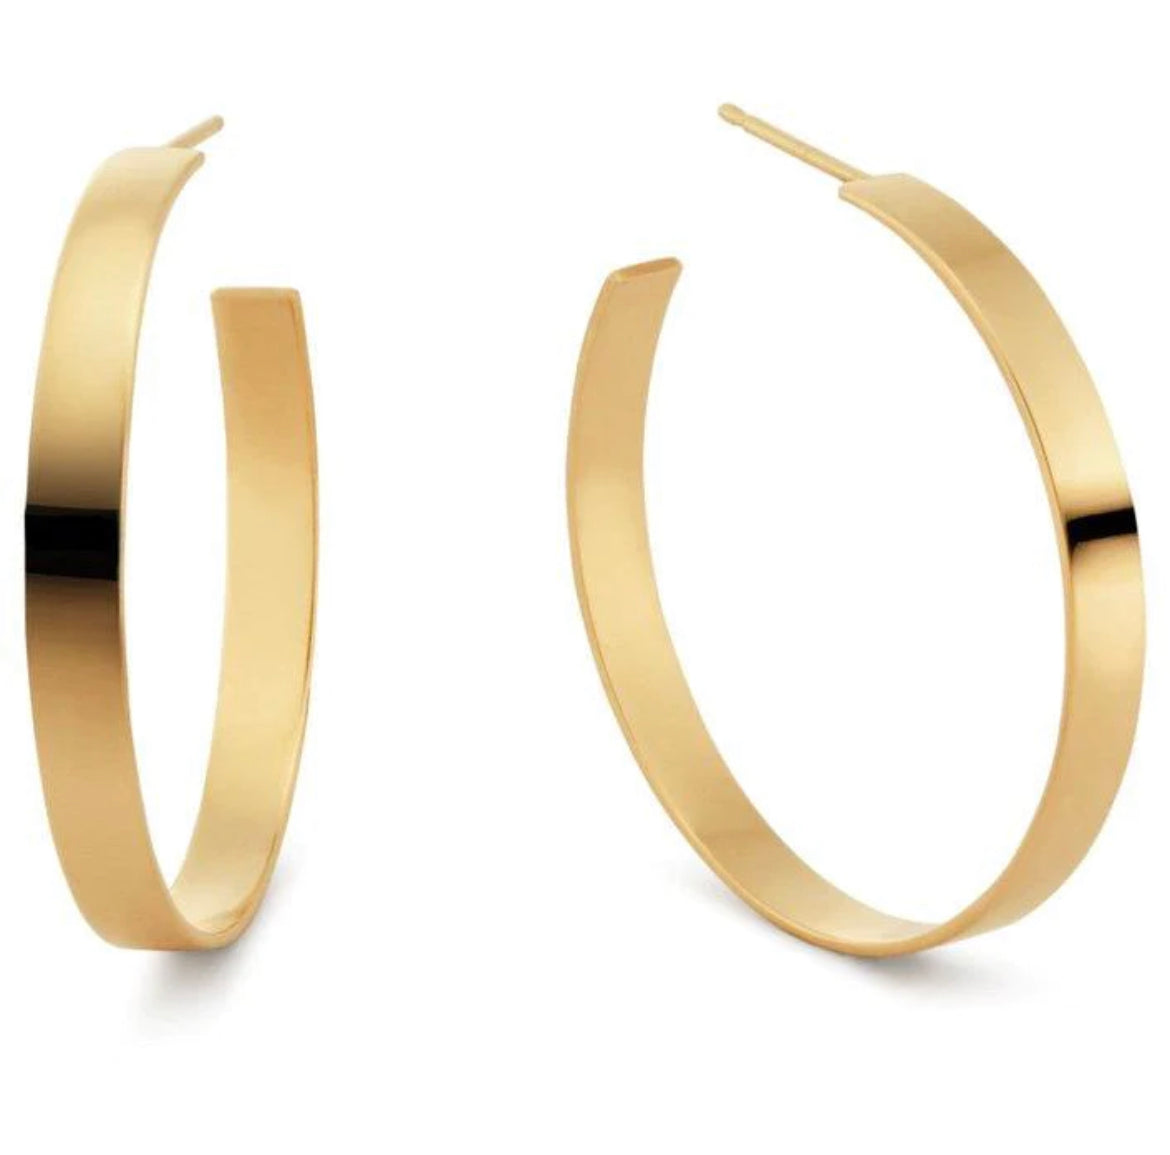 Carrie Flat Hoops - Gold